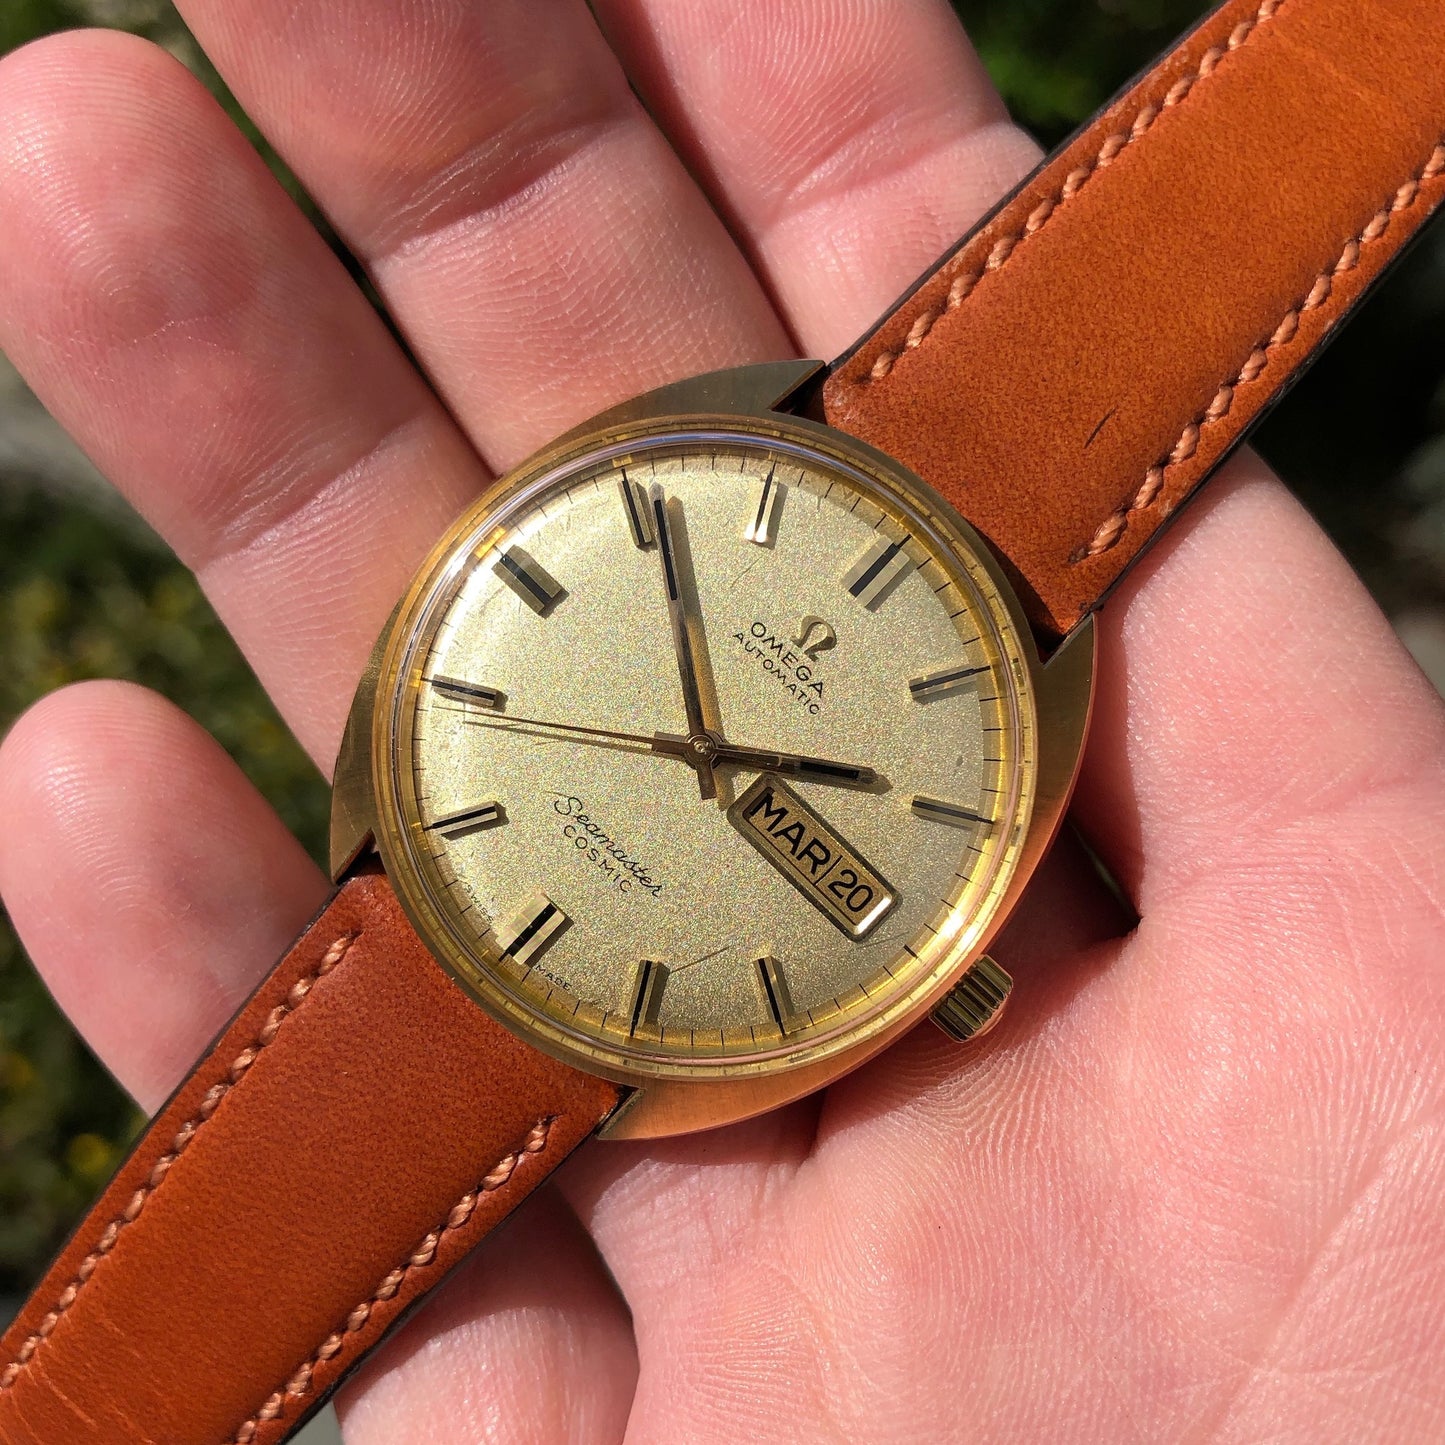 Vintage Omega Seamaster Cosmic 166.049 Day Date 18K Yellow Gold Cal. 752 Automatic Wristwatch - Hashtag Watch Company